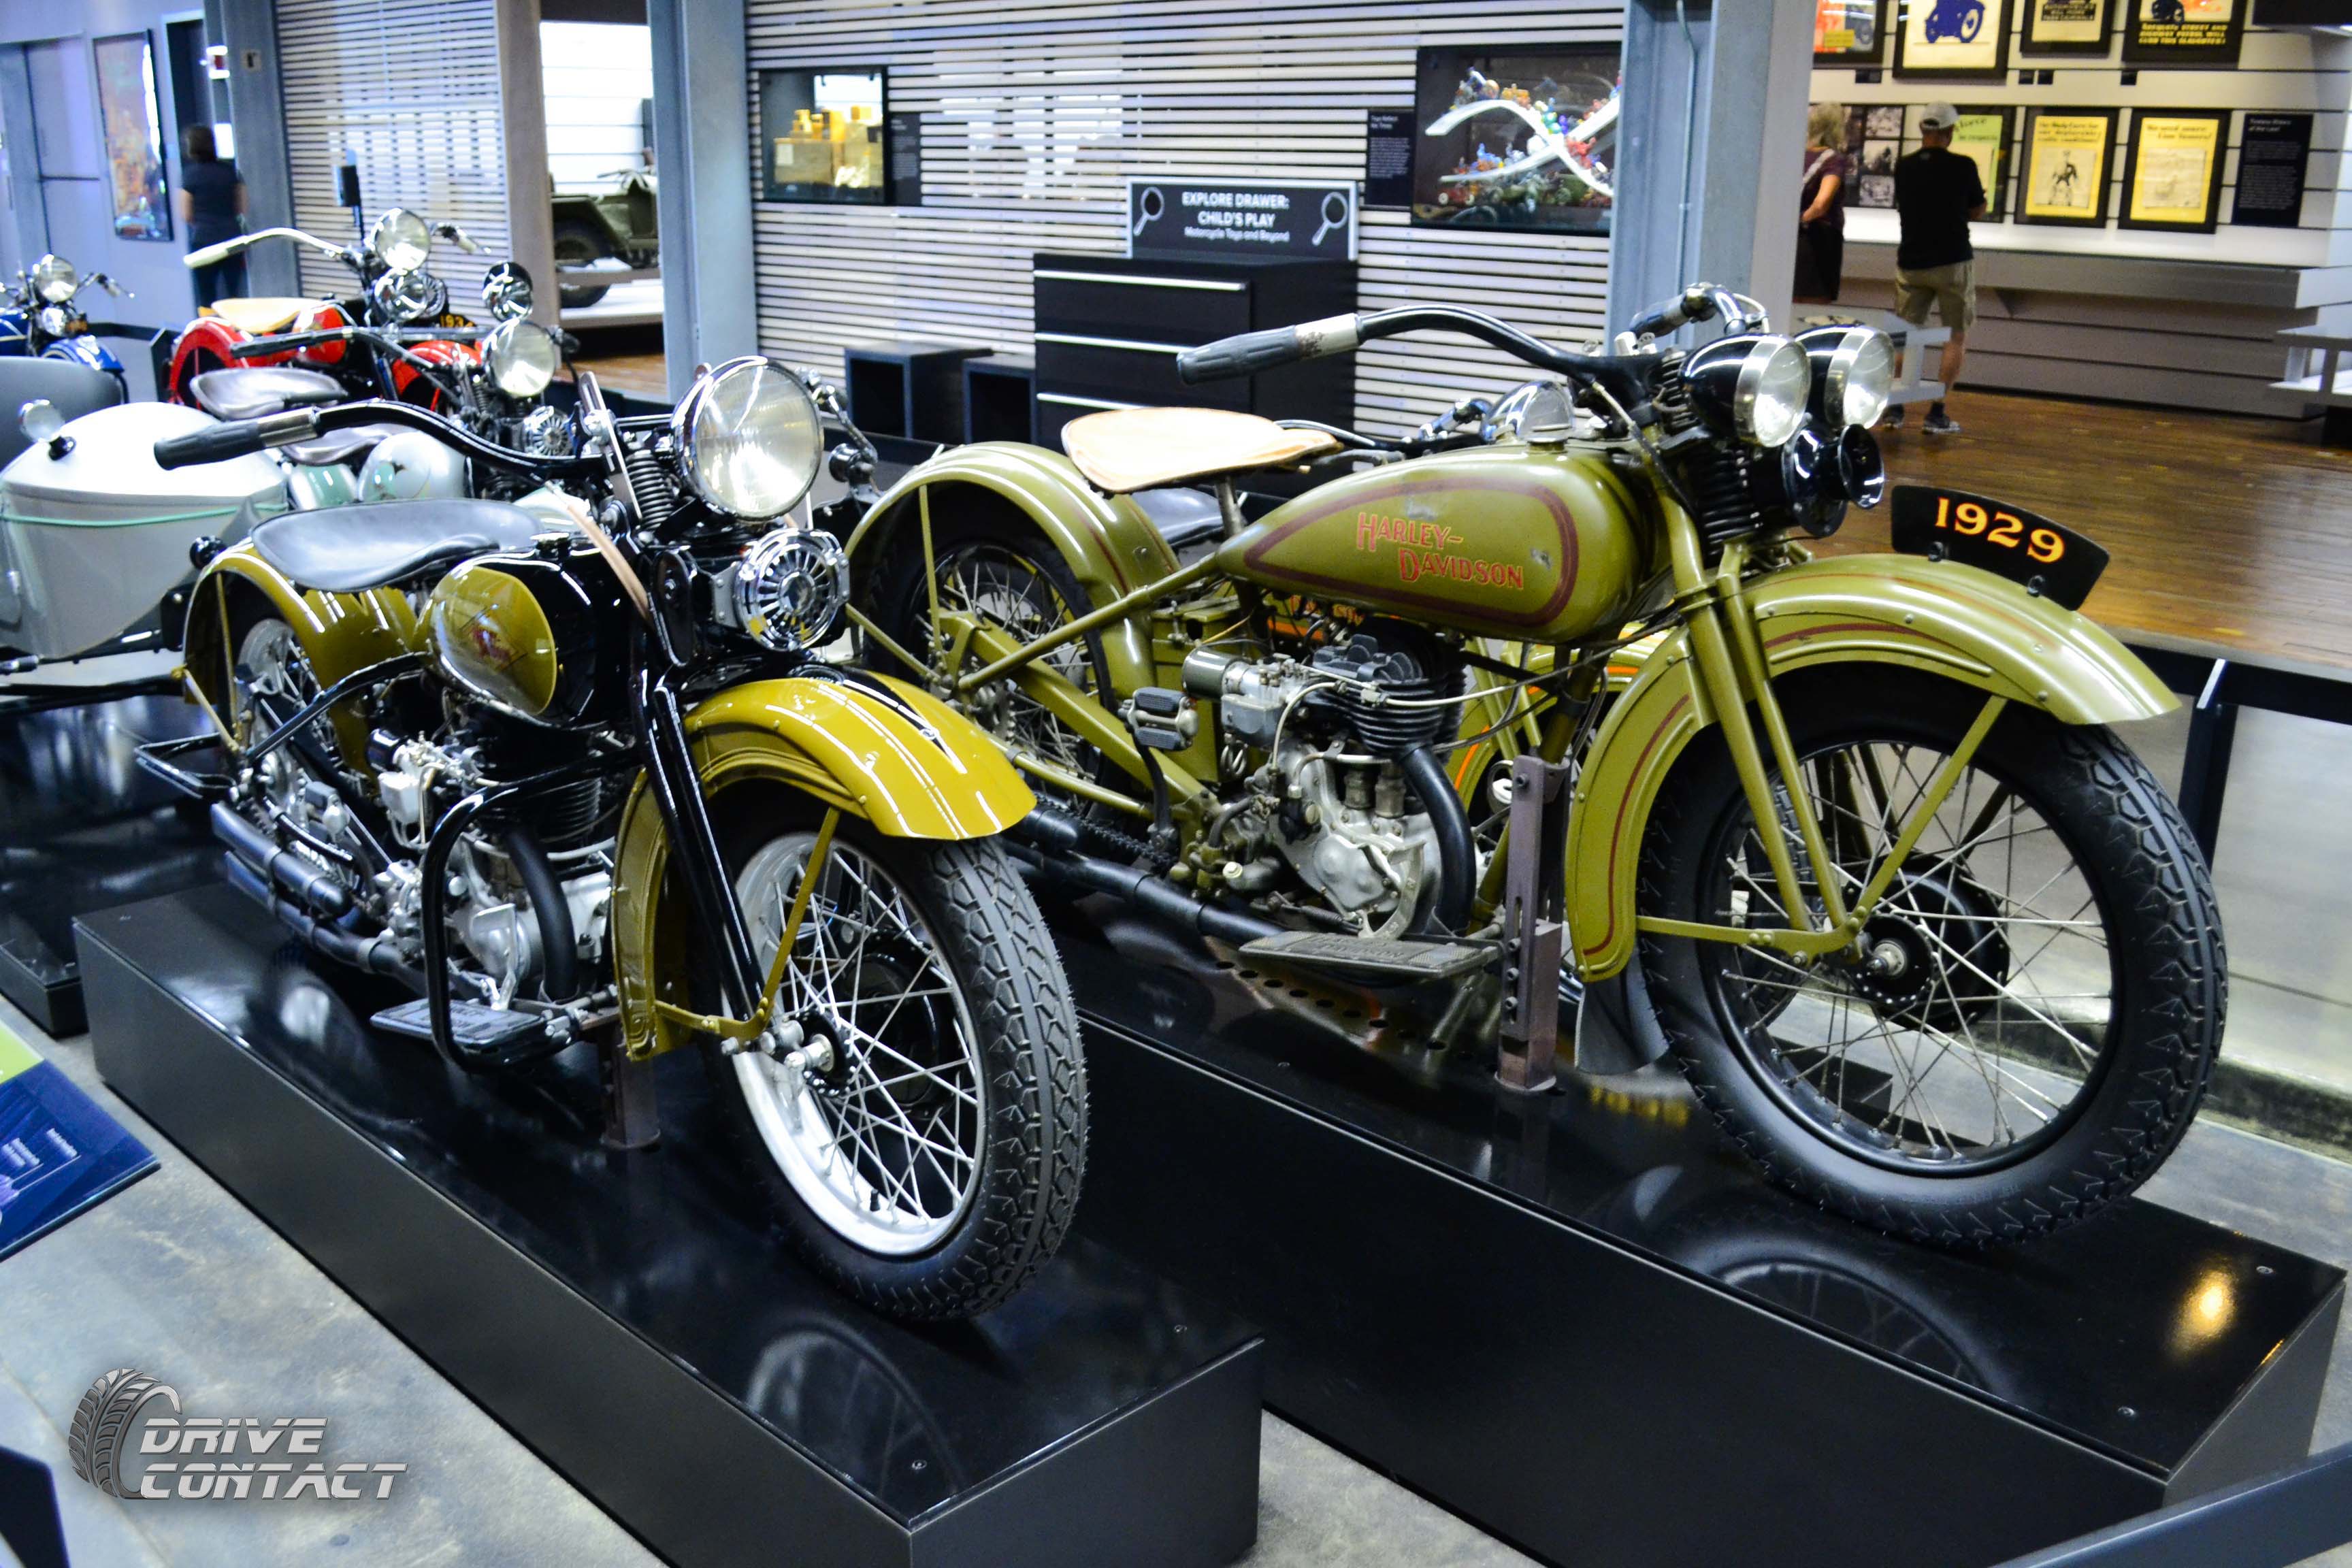 Photos from Harley-Davidson Museum